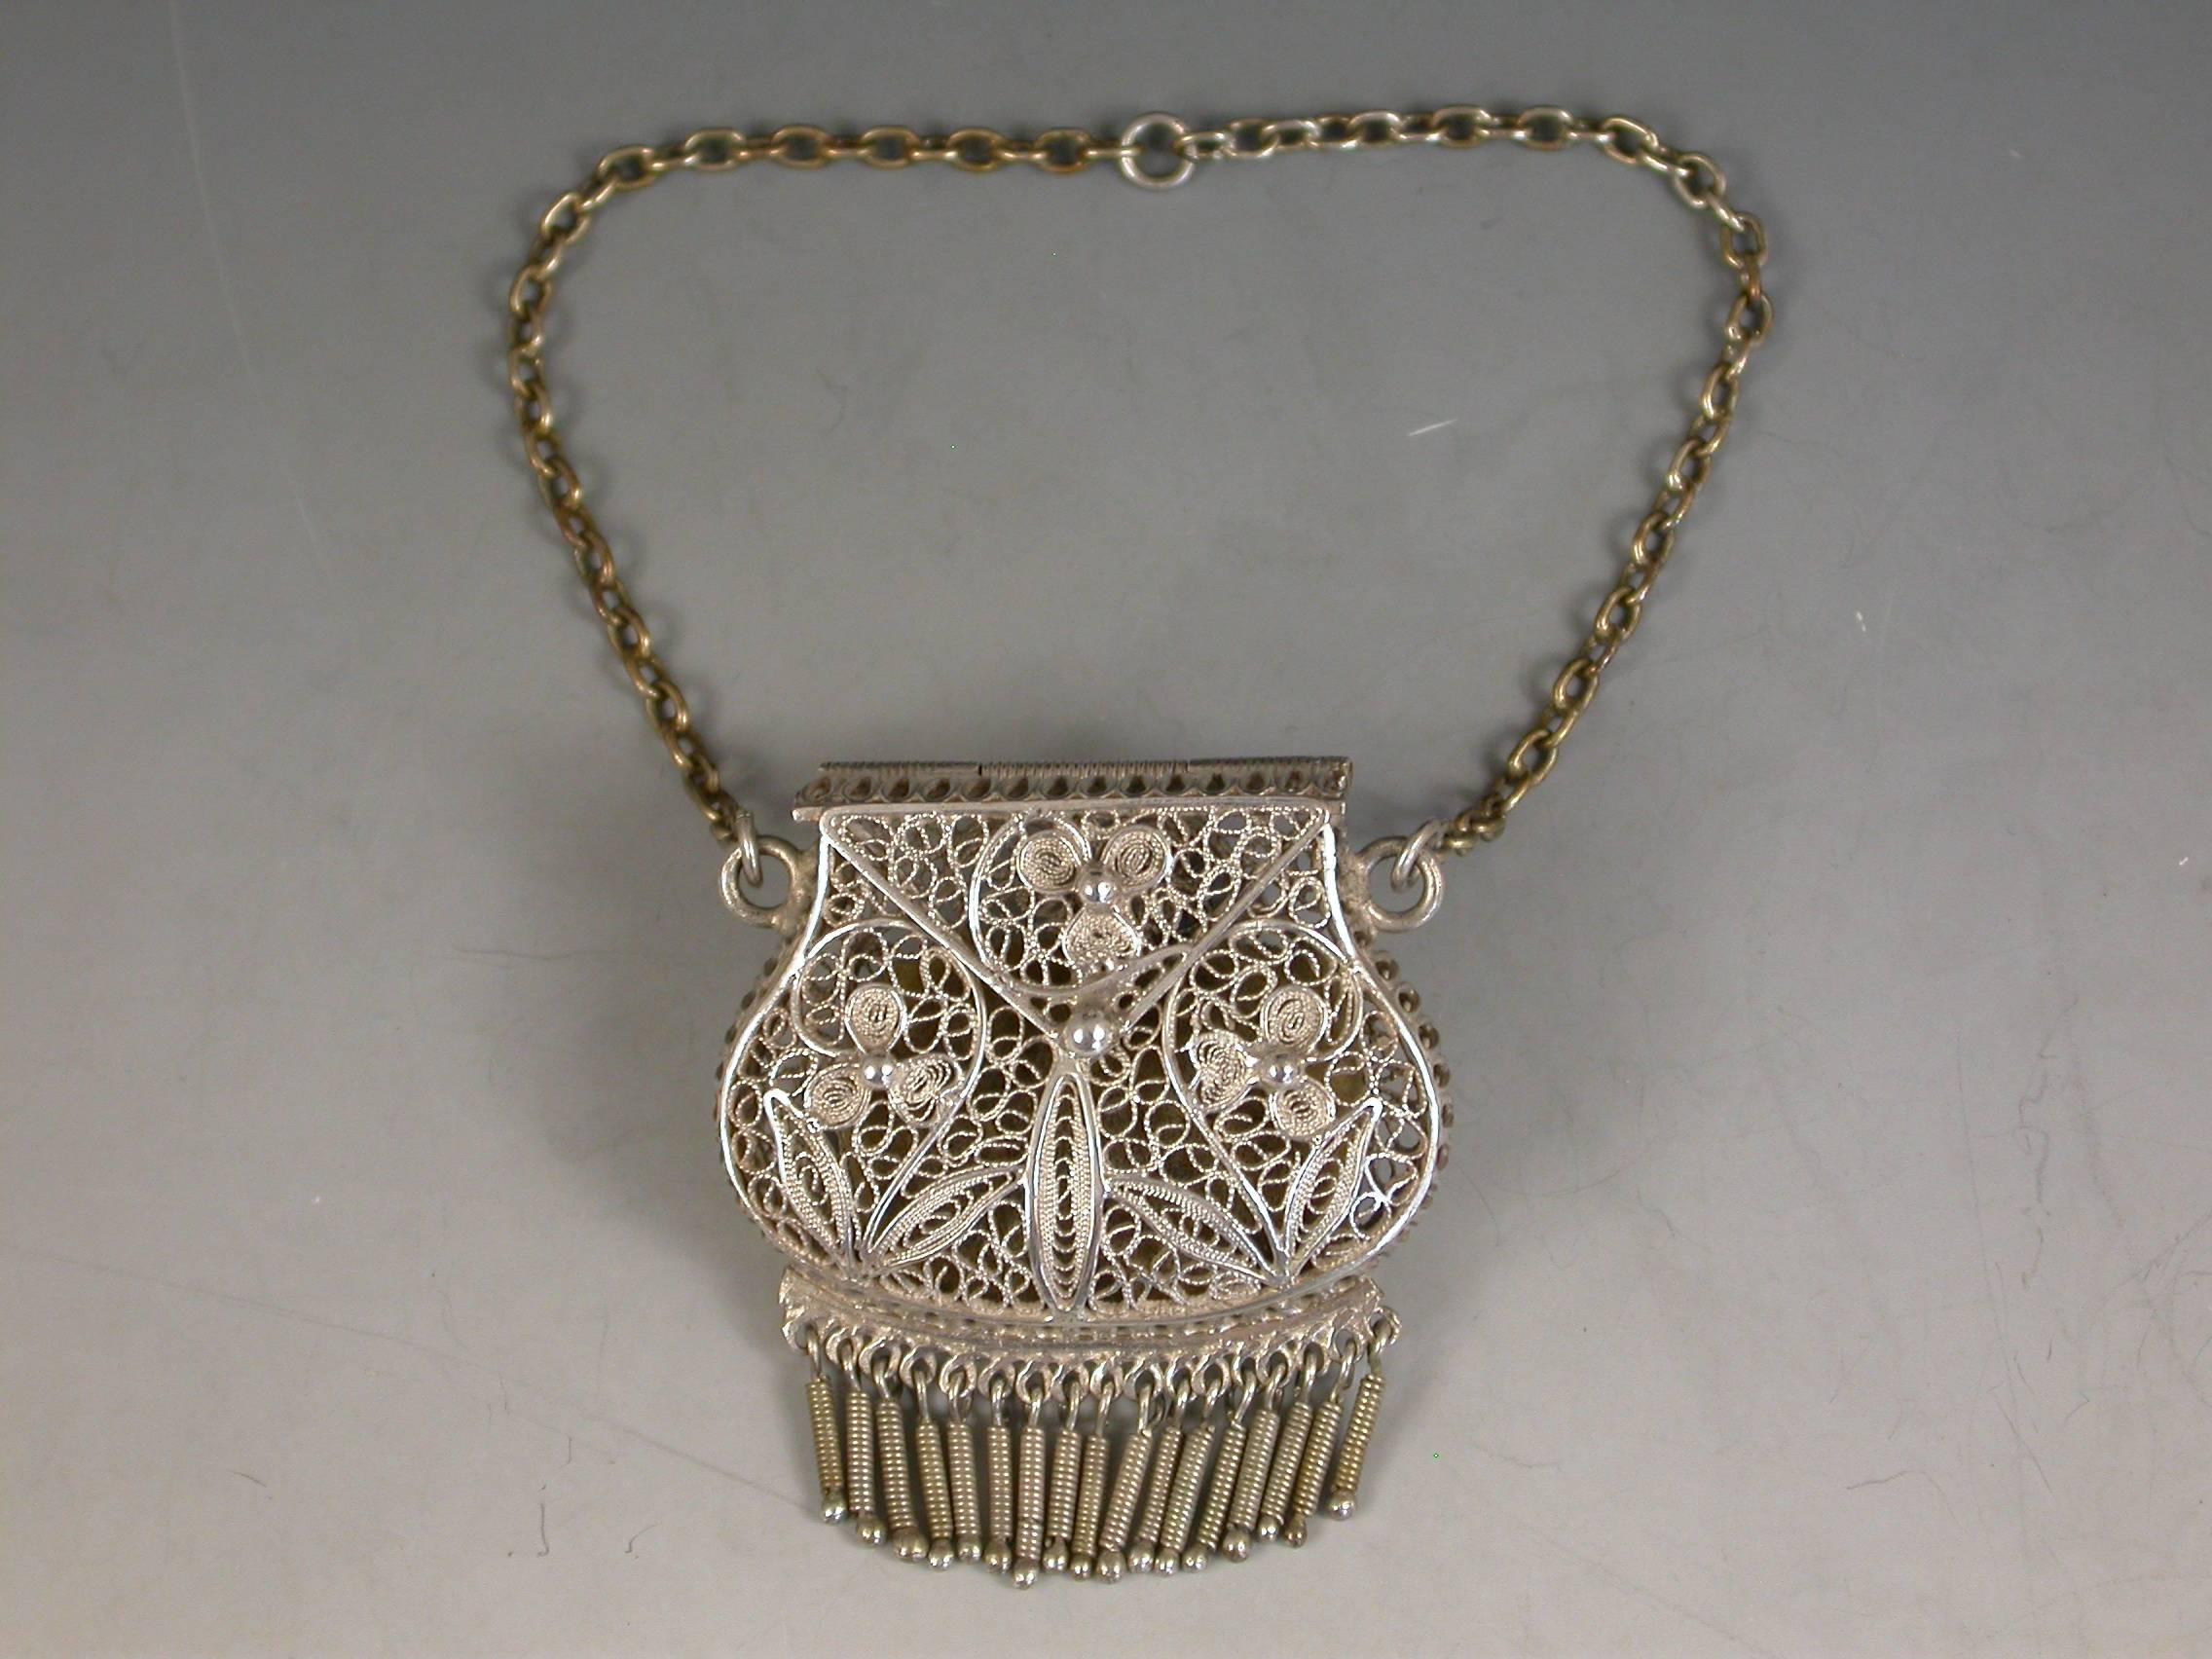 A good quality late 19th century silver filigree Chatelaine Purse Vinaigrette with attached suspension chain and pendant spring fringe, the hinged cover and body finely decorated with flower heads and scrolls.

Unmarked circa 1880

In good